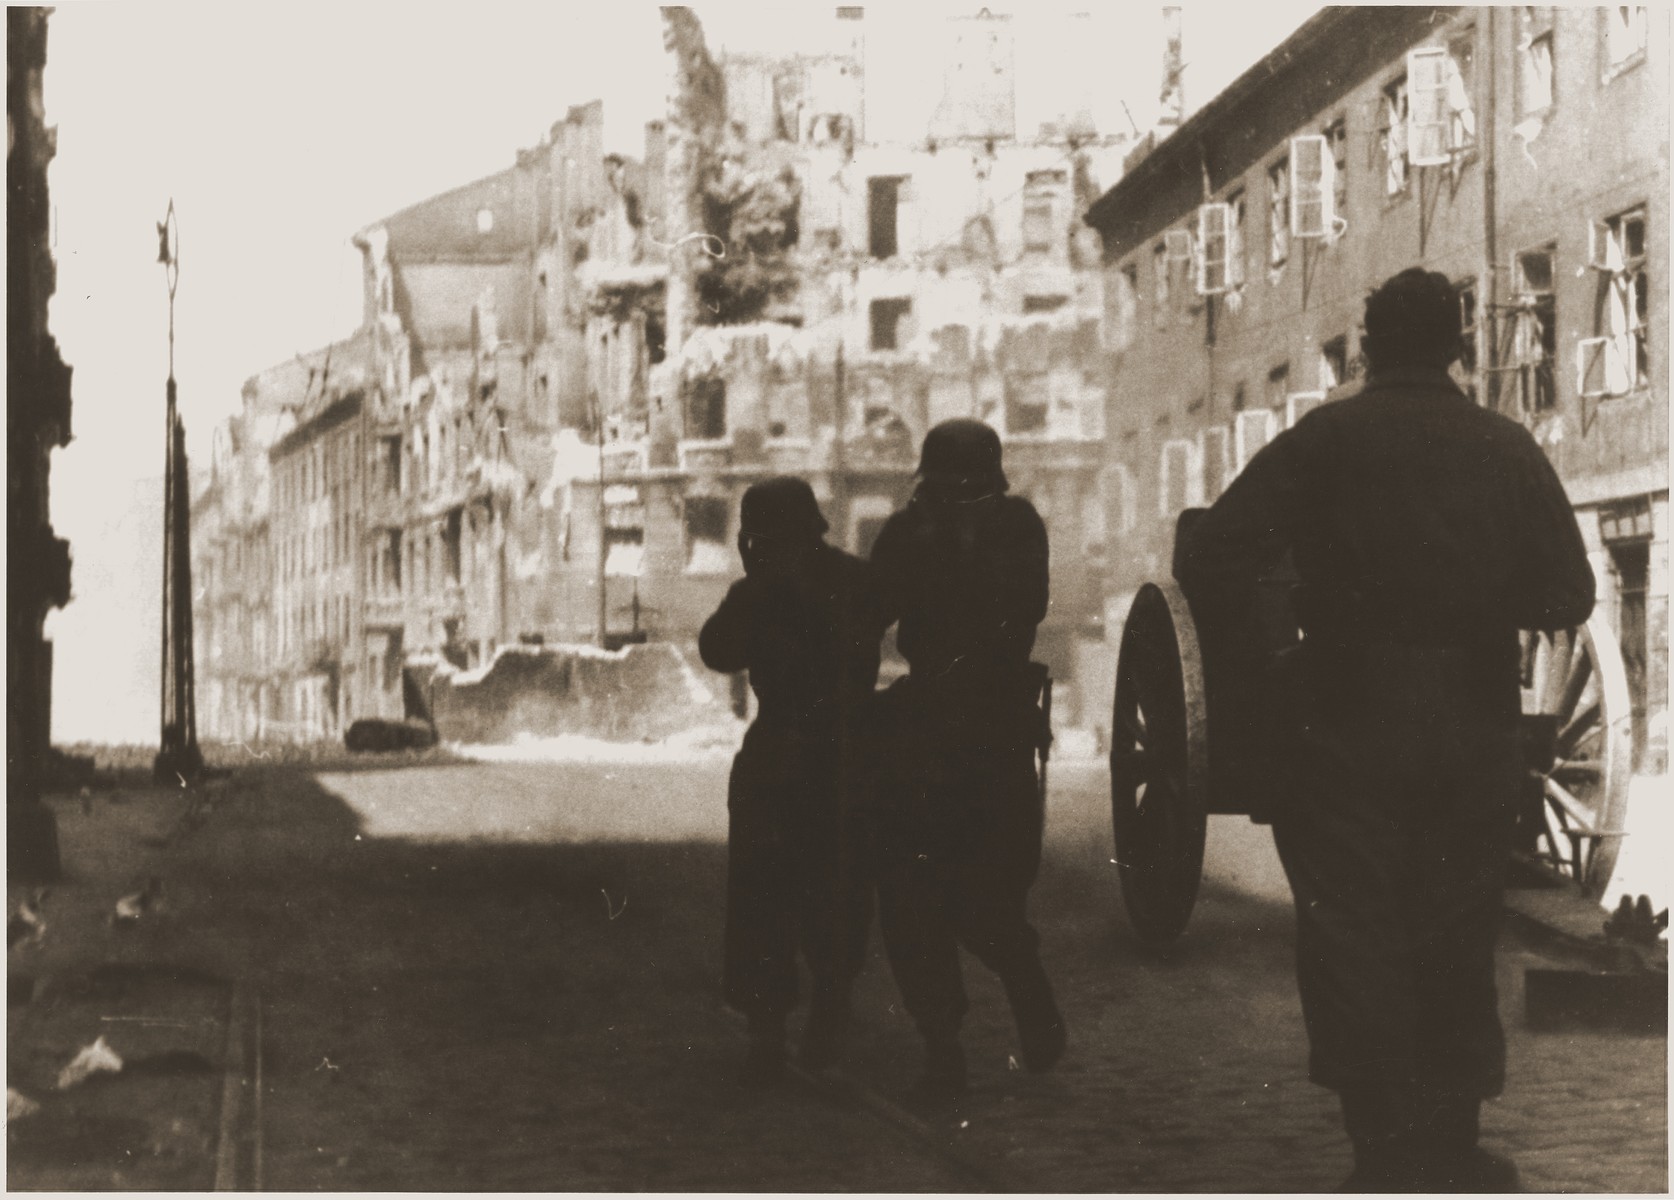 A German gun crew shells a housing block during the suppression of the Warsaw ghetto uprising.  

The original caption (translated from German) reads: "Destruction of a housing block."